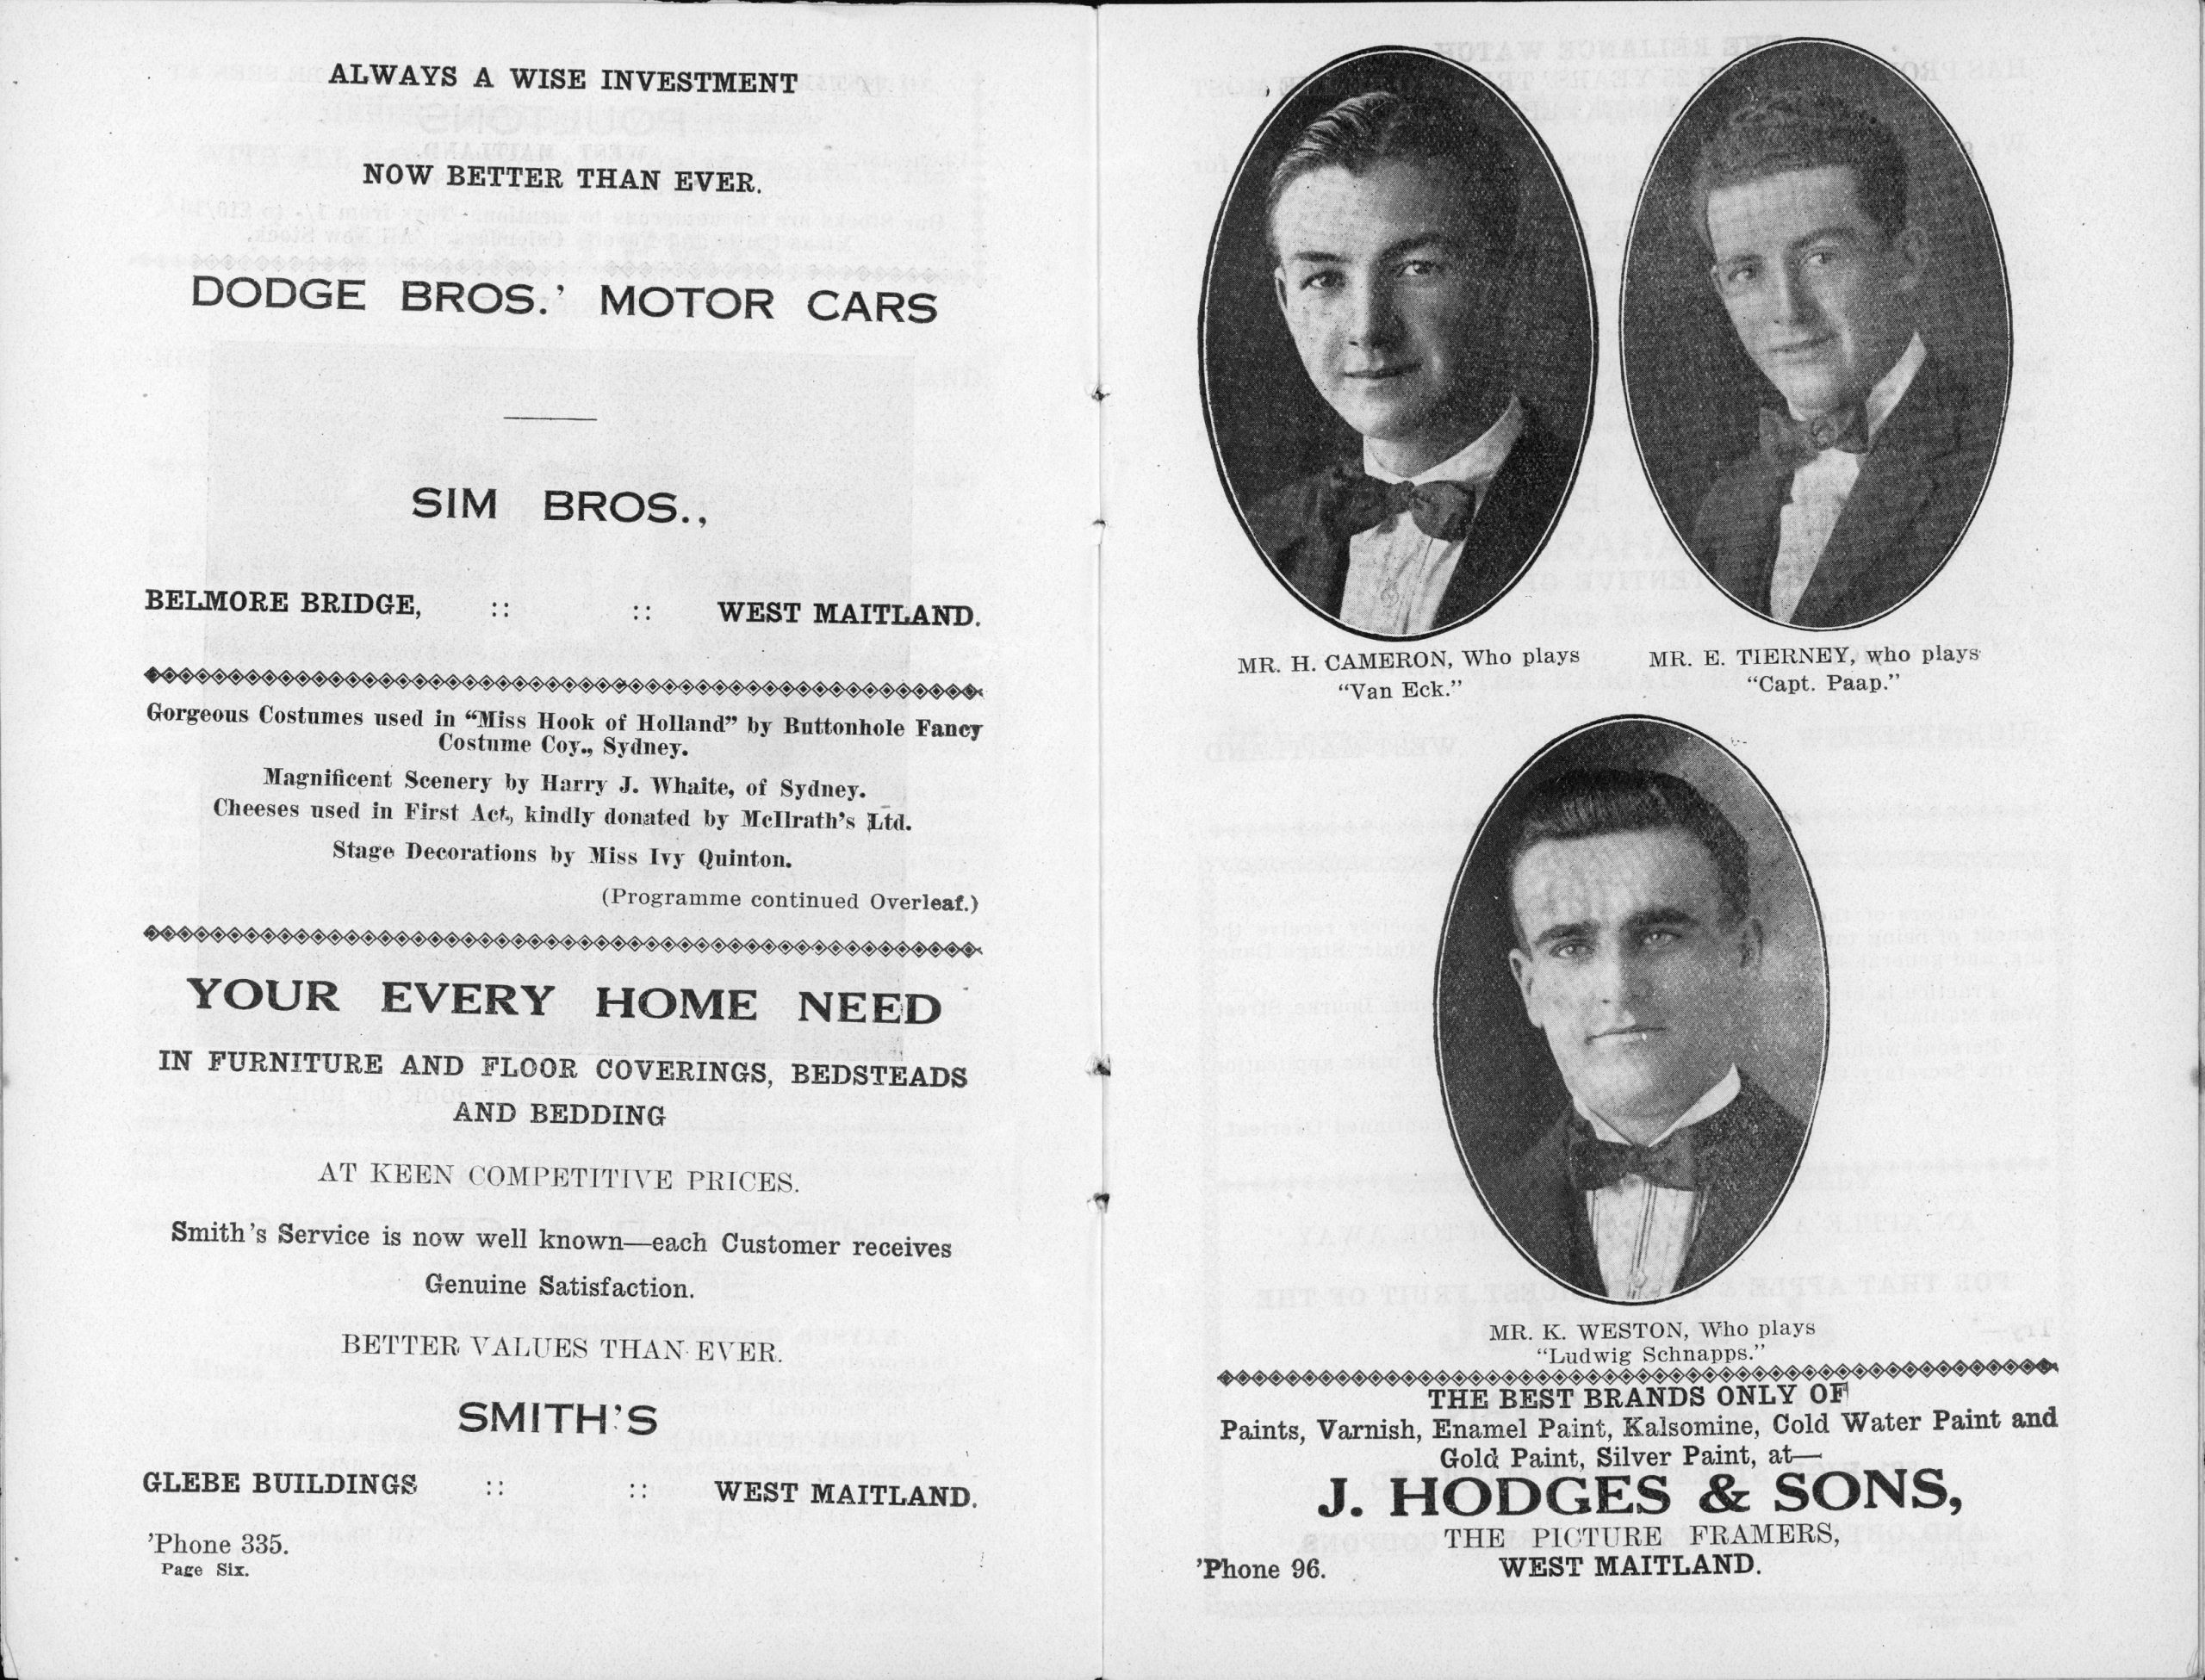 Text advertisements for motor cars, furniture, and picture framing alongside three photographs of cast members: Mr H. Cameron (as 'Van Eck'), Mr E. Tierney (as 'Capt. Paap'), and Mr K. Weston (as 'Ludwig Schnapps').